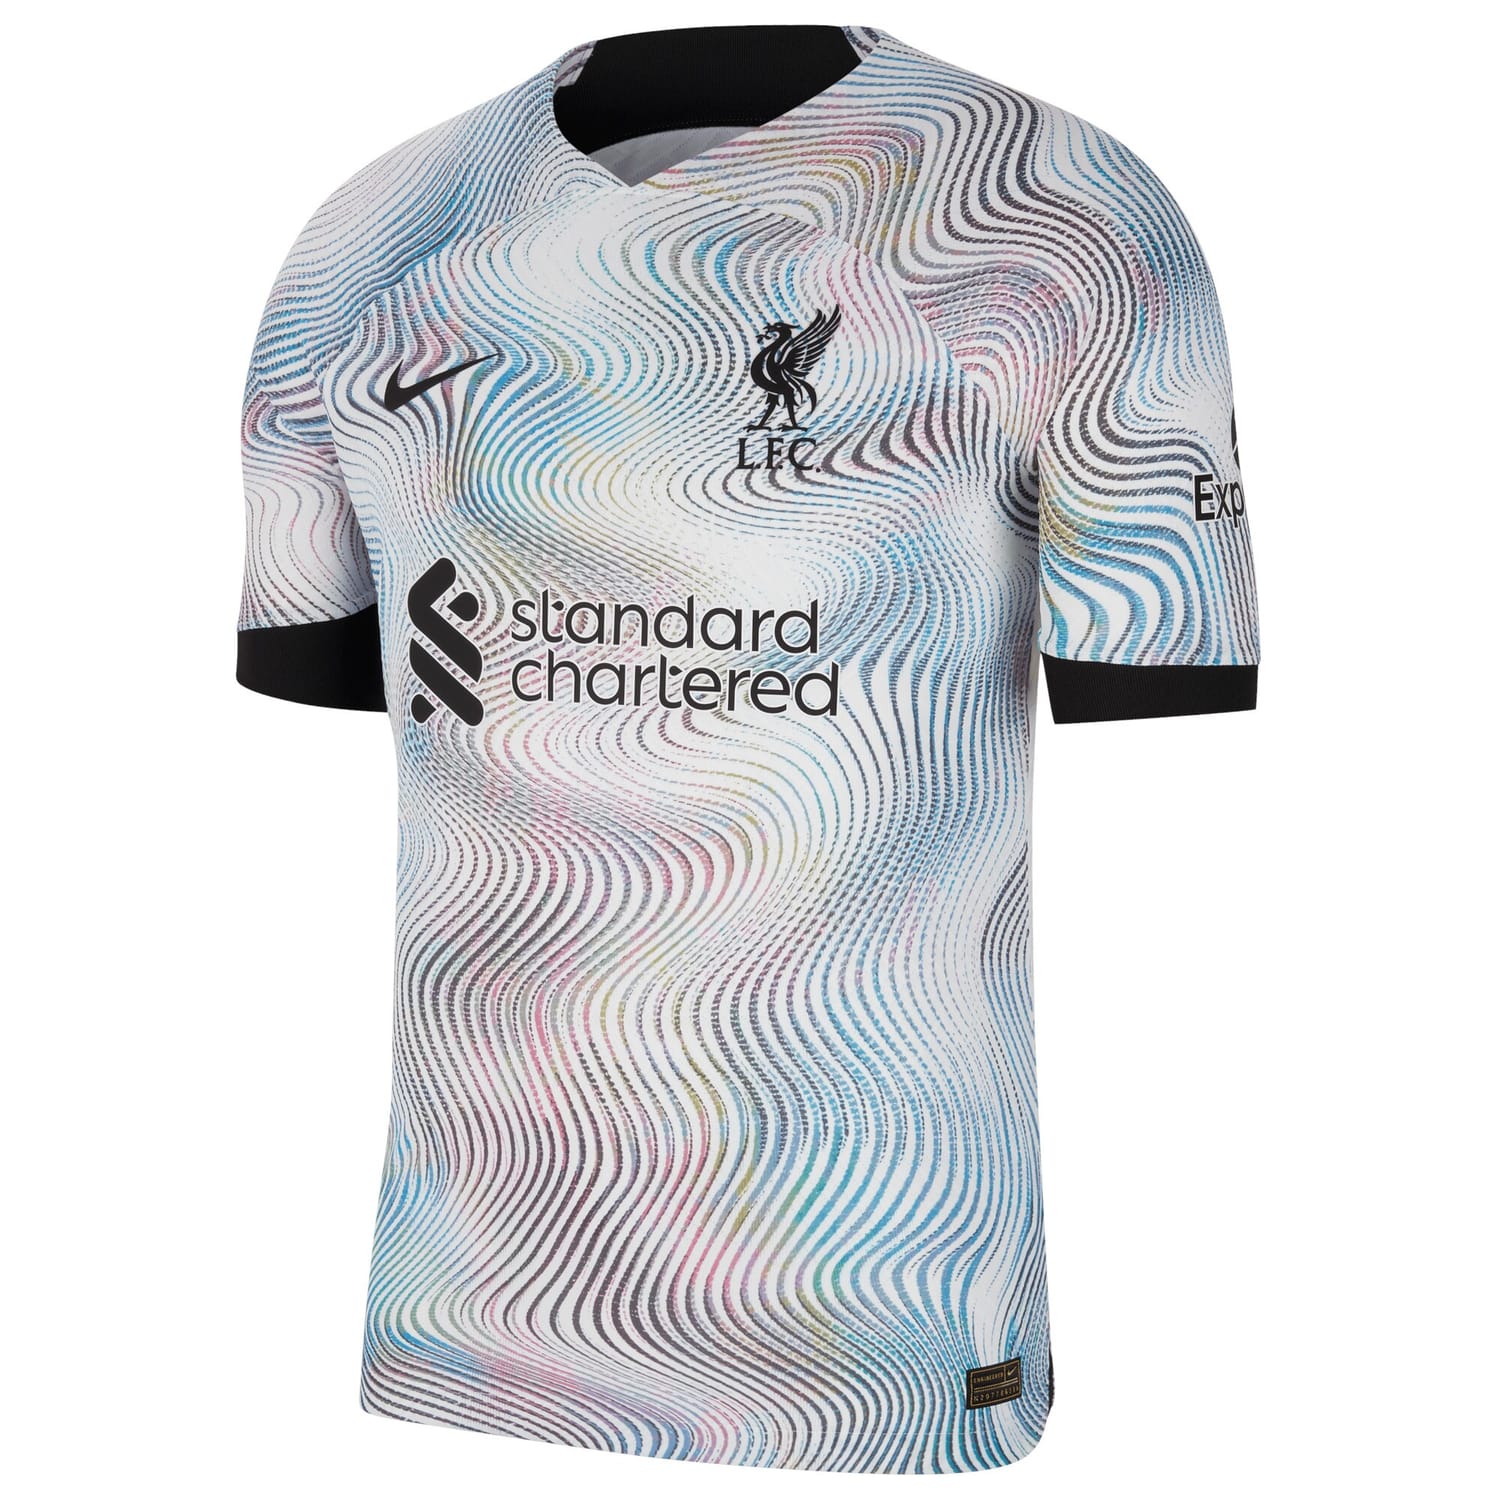 Premier League Liverpool Away Authentic Jersey Shirt 2022-23 player Thiago 6 printing for Men